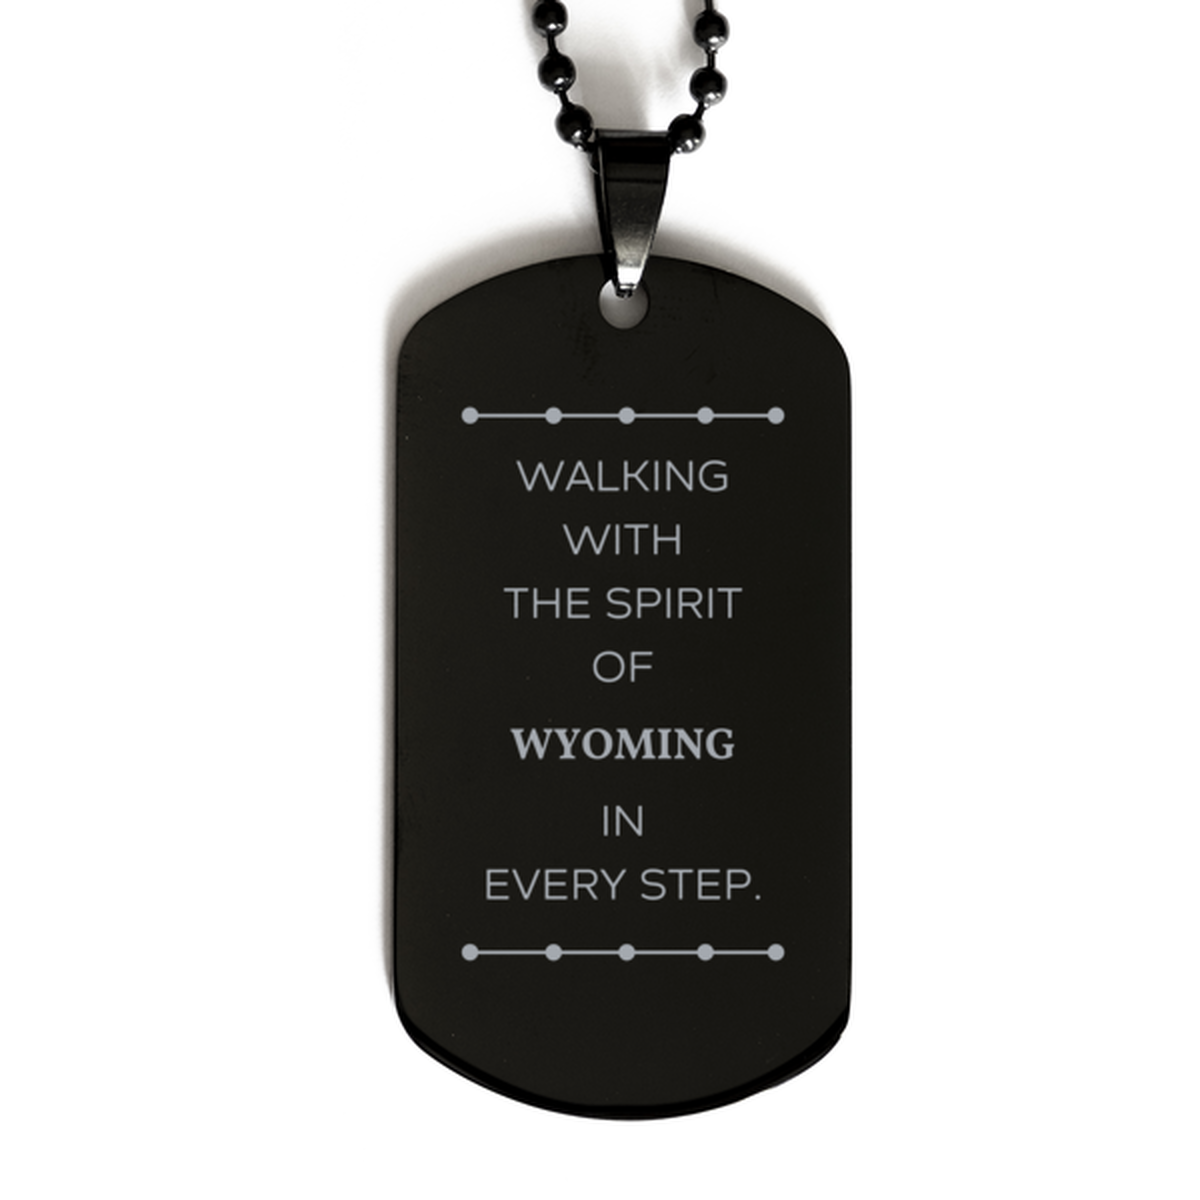 Wyoming Gifts, Walking with the spirit, Love Wyoming Birthday Christmas Black Dog Tag For Wyoming People, Men, Women, Friends